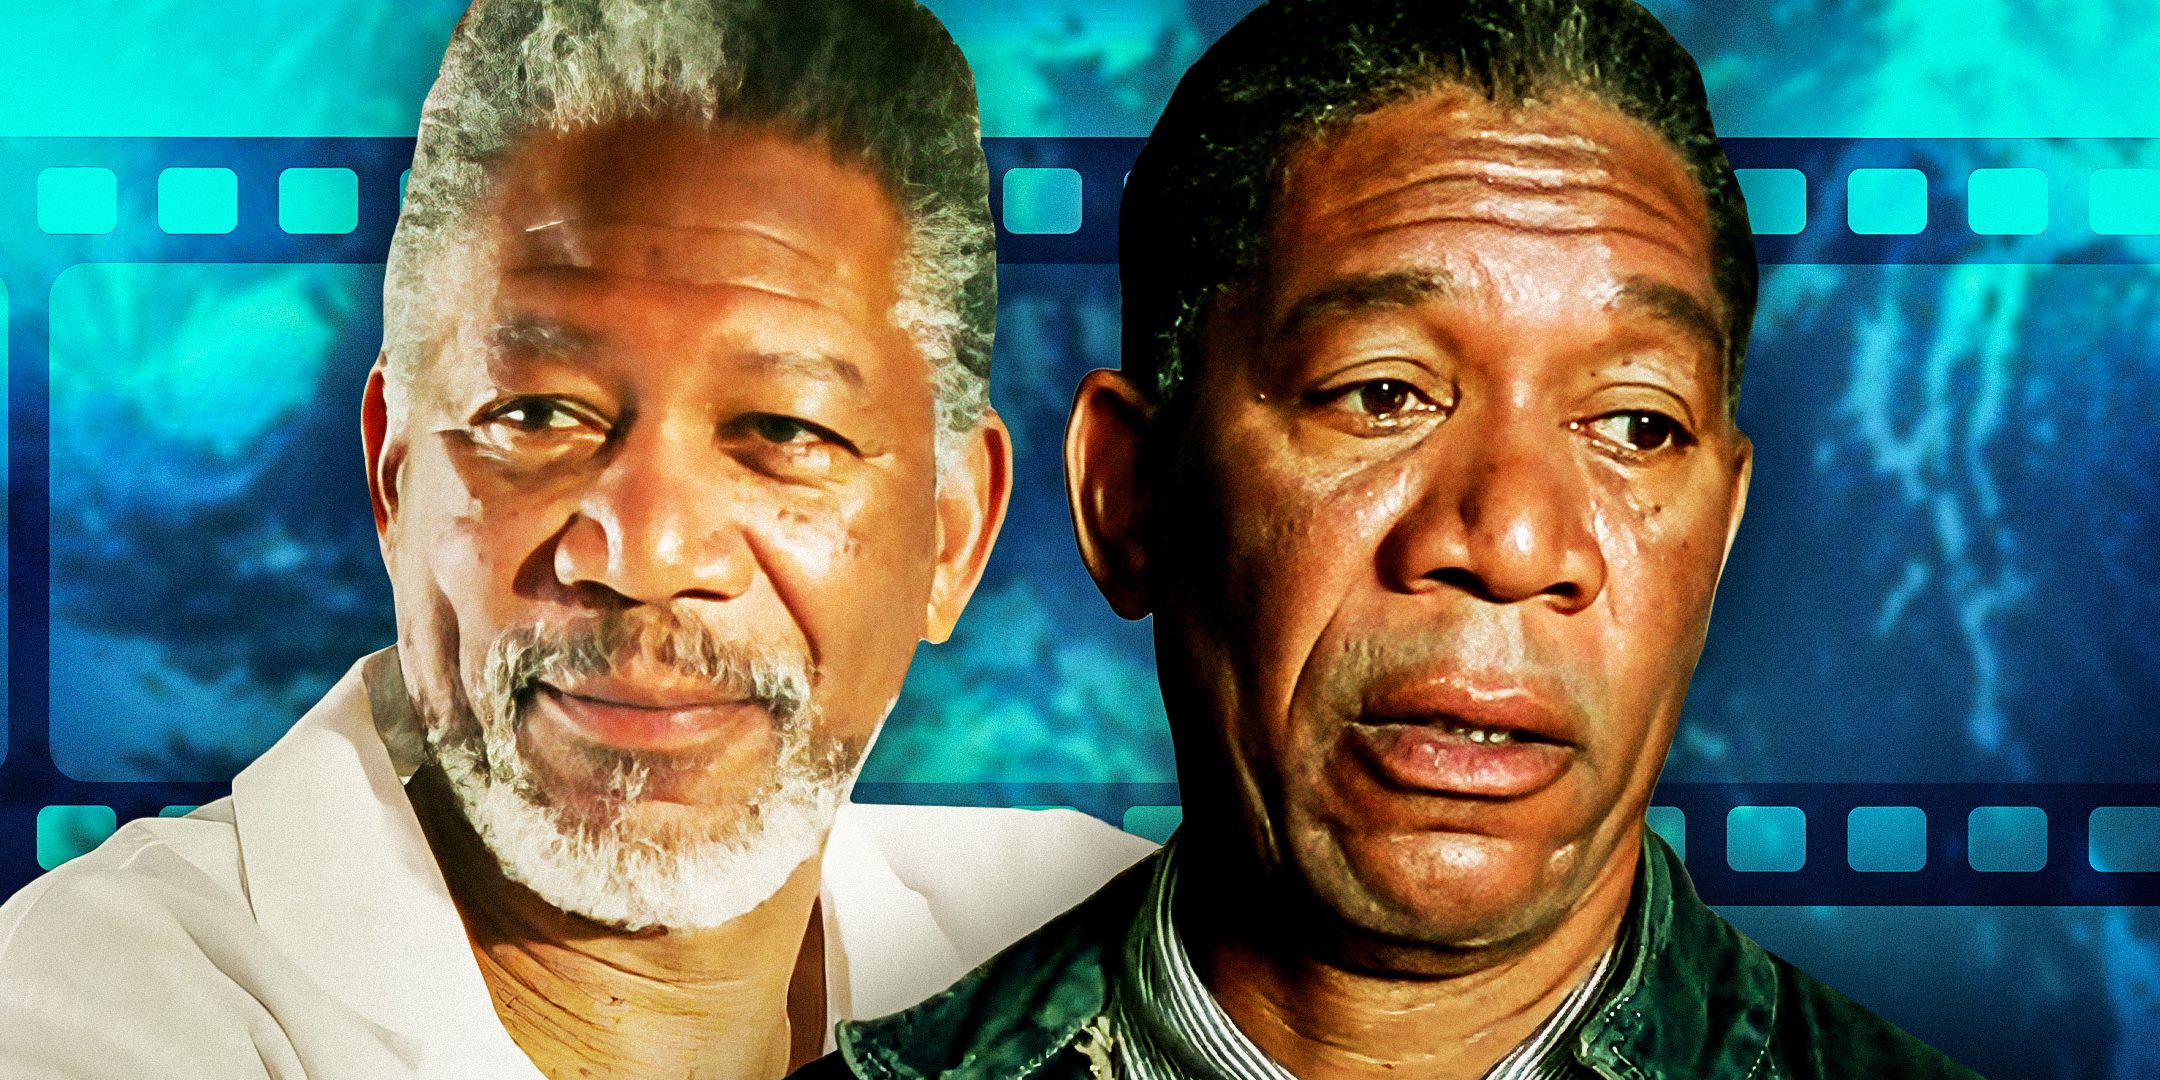 Morgan-Freeman-in-The-Shawshank-Redemption-and-Bruce-Almighty